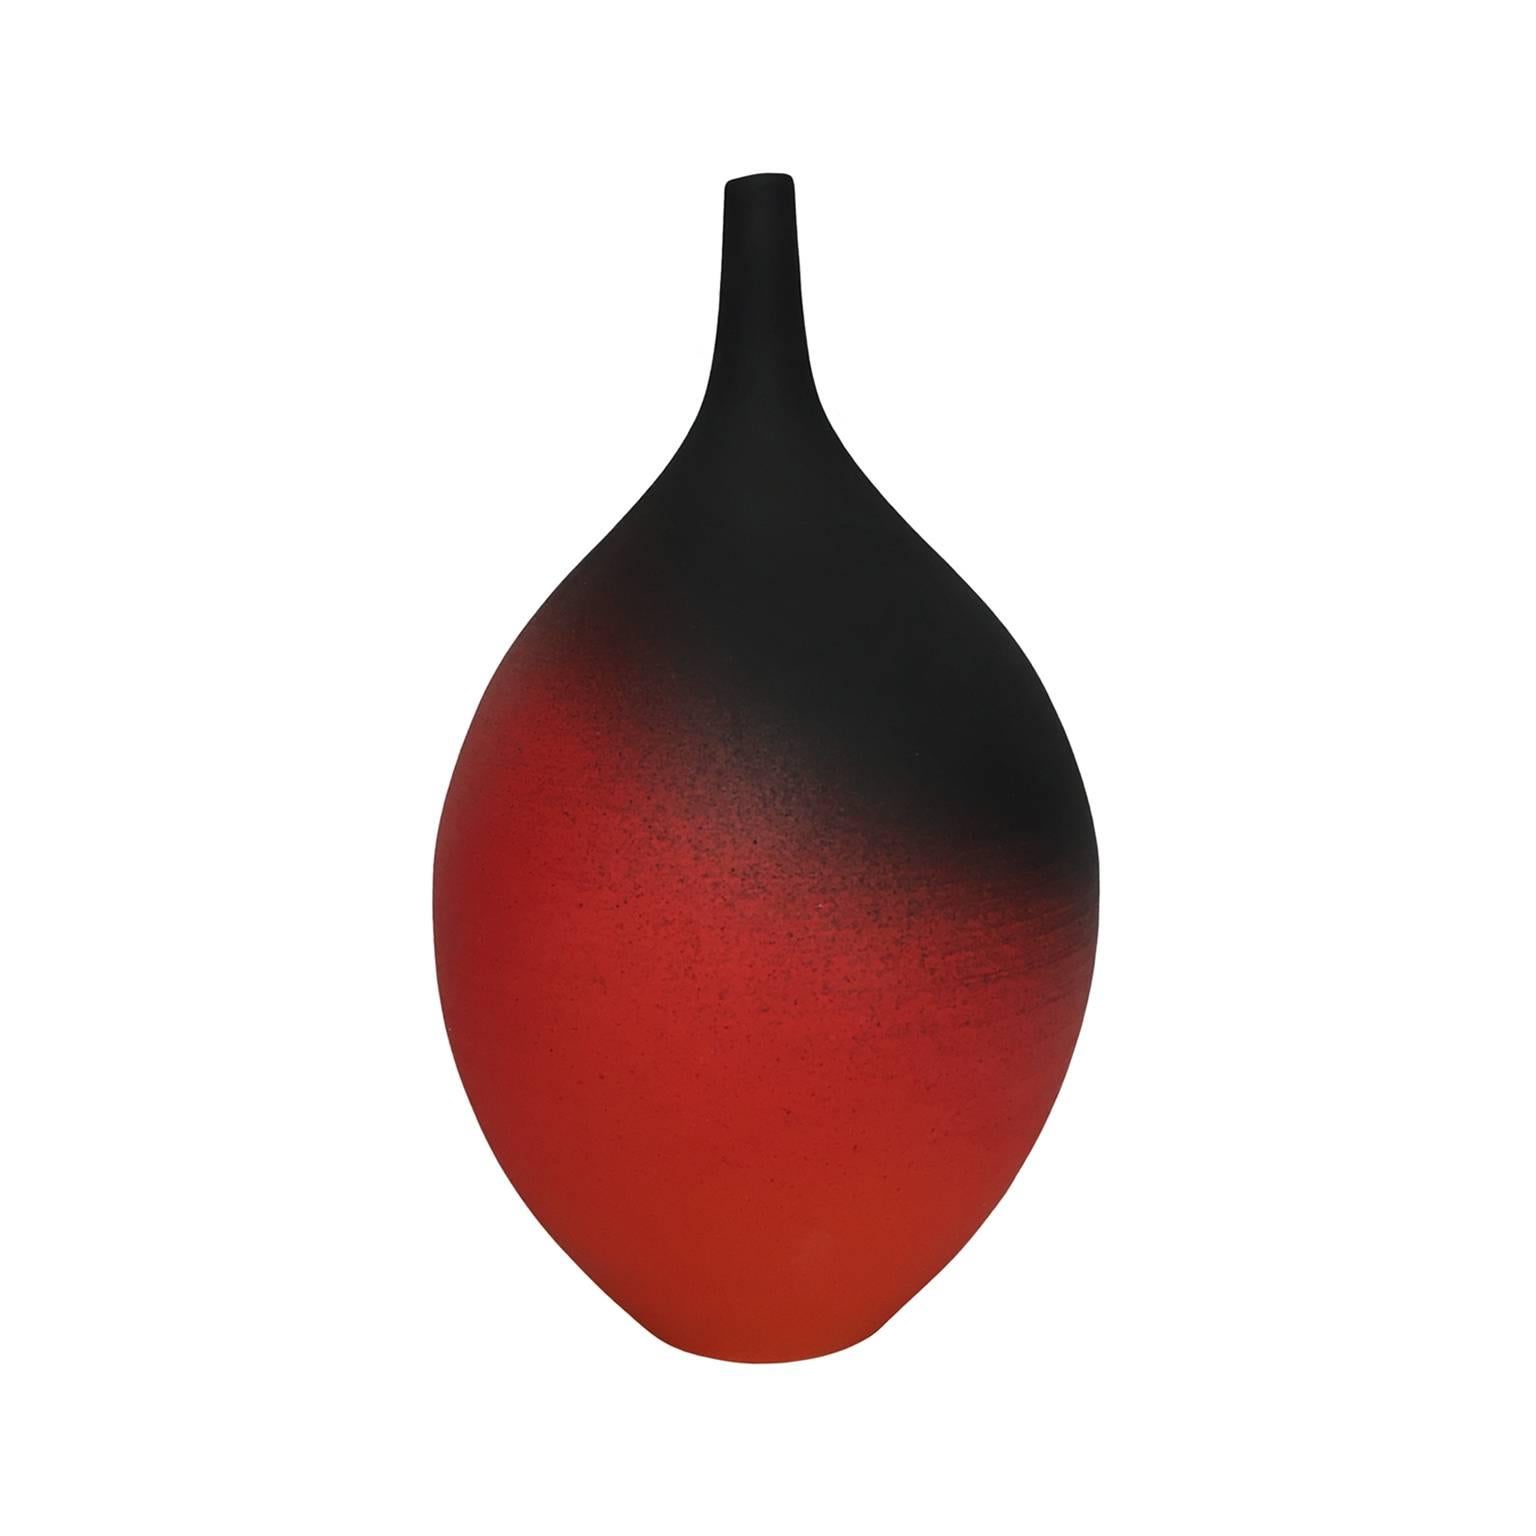 Red Ombre Matte Ceramic Bottle Form Vase with Narrow Neck by Sandi Fellman